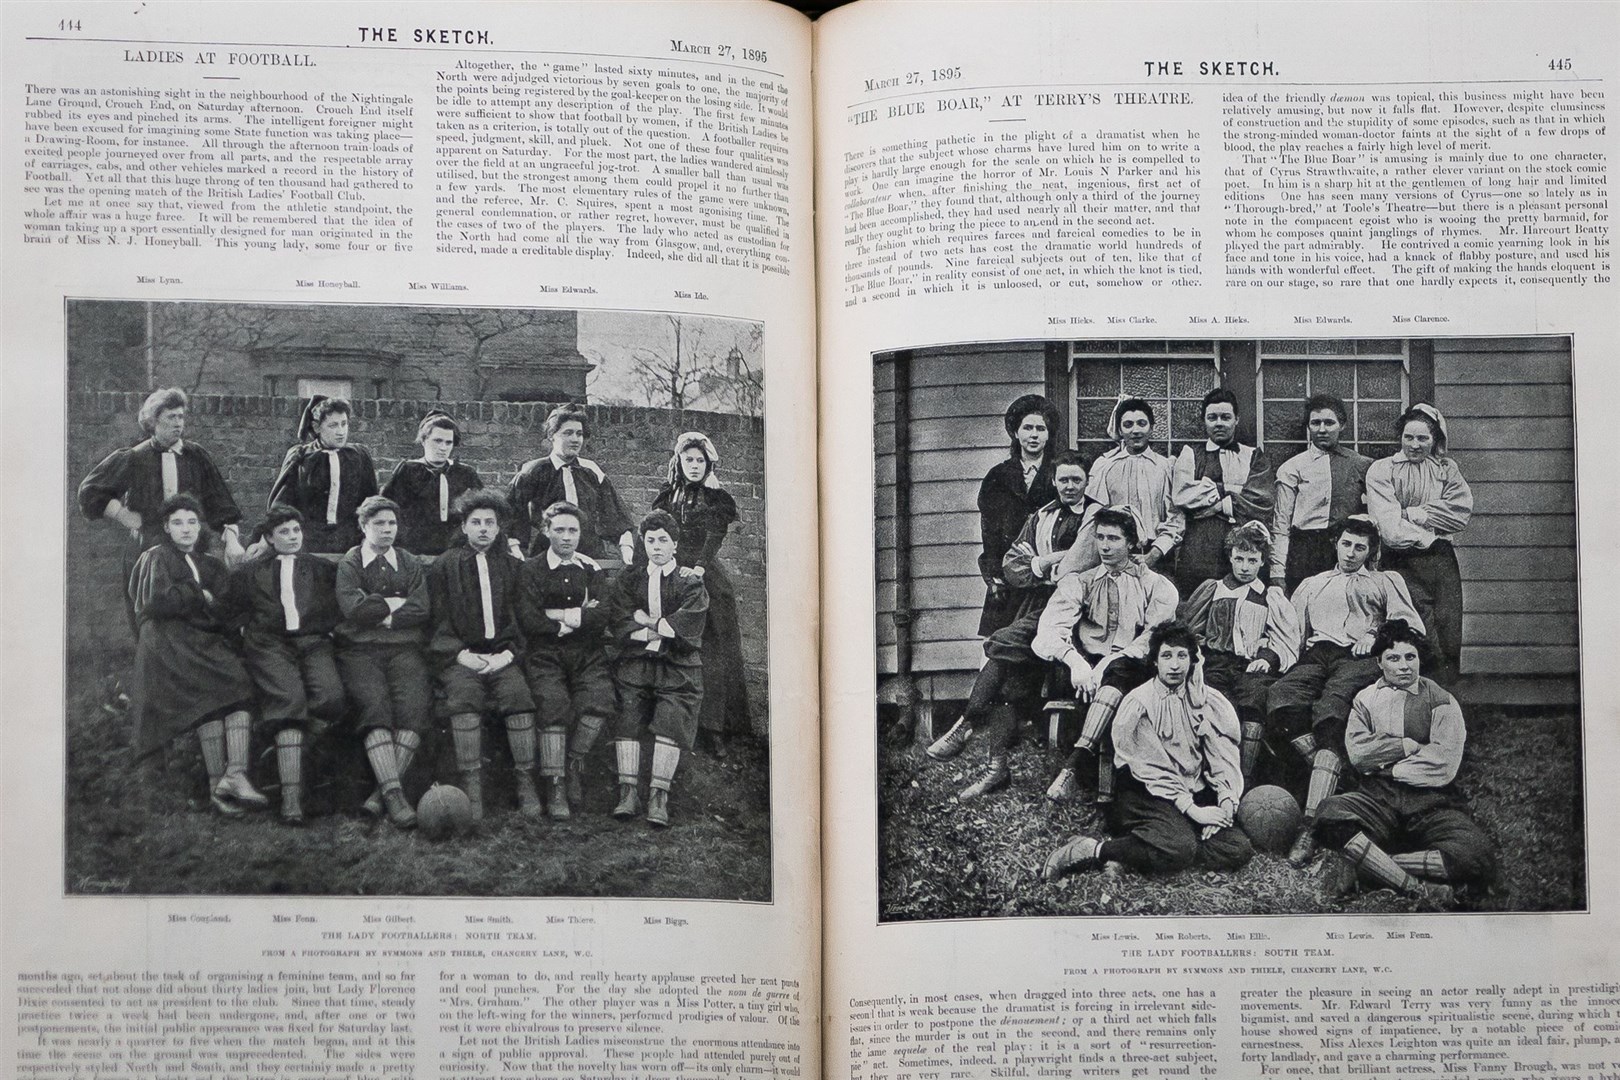 The article from The Sketch magazine on the women’s North v South football match played on March 27 1895 – the first known organised women’s football match to take place in London (Aaron Chown/PA)